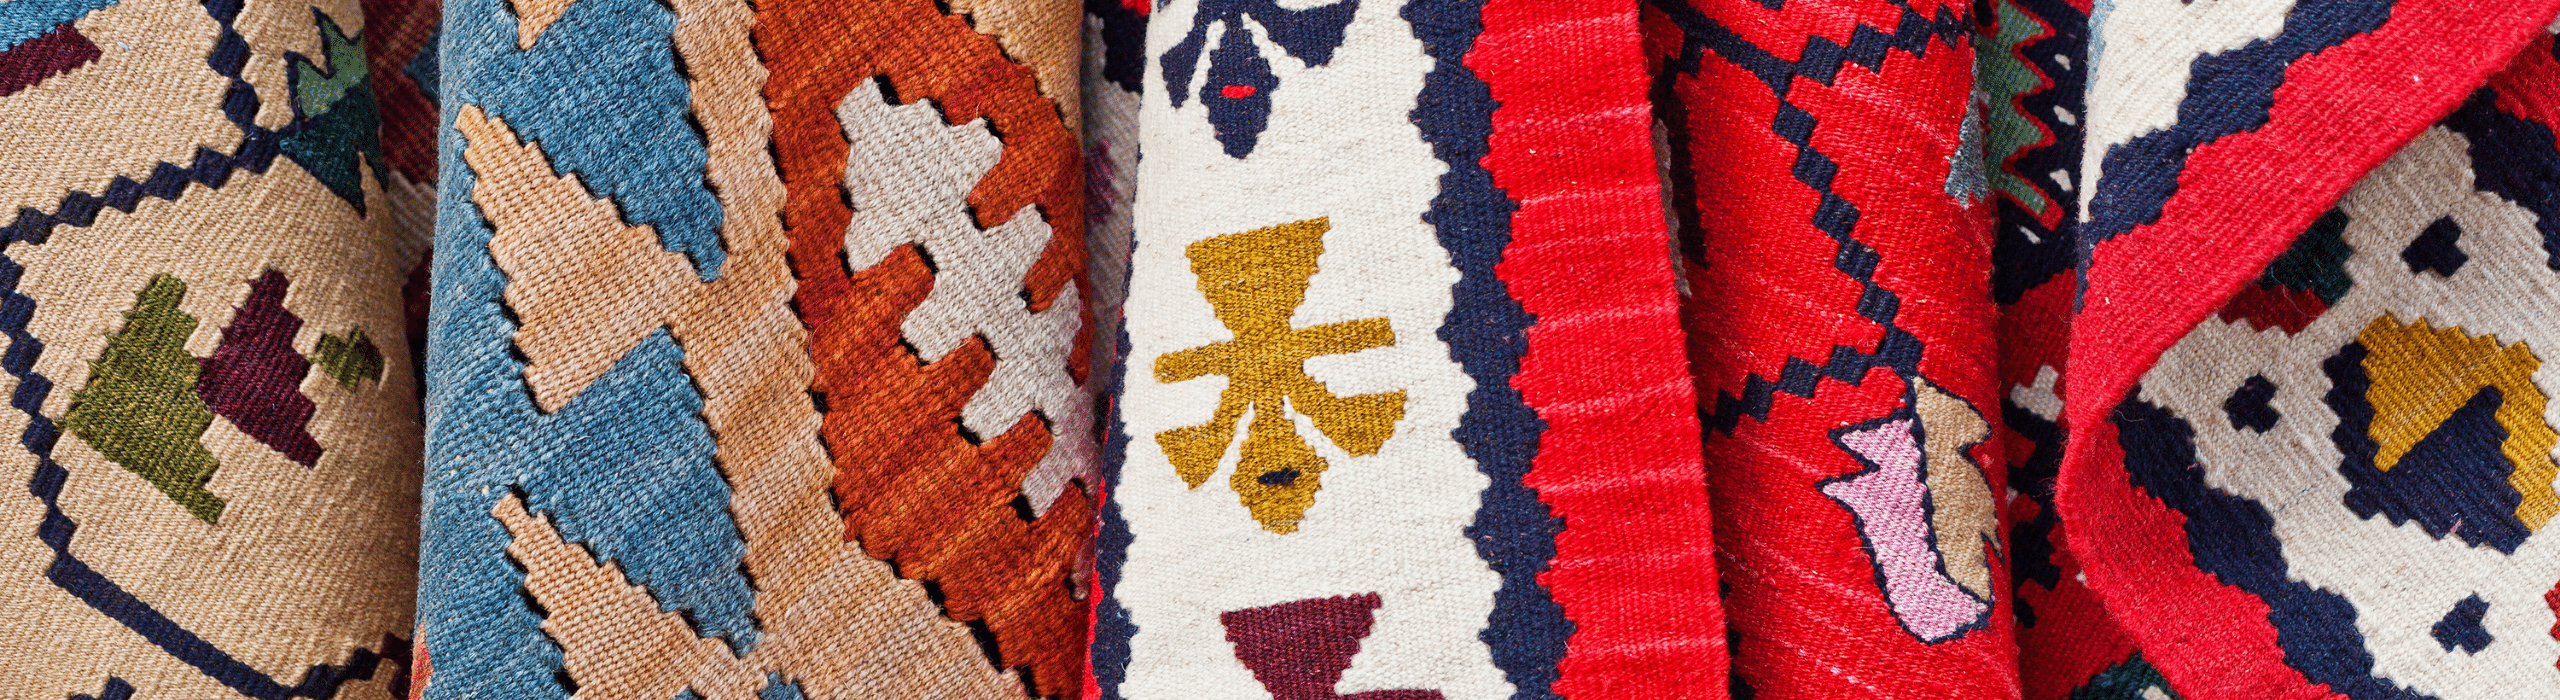 Detail of hanging collection of kilim rugs, featuring several colors and designs